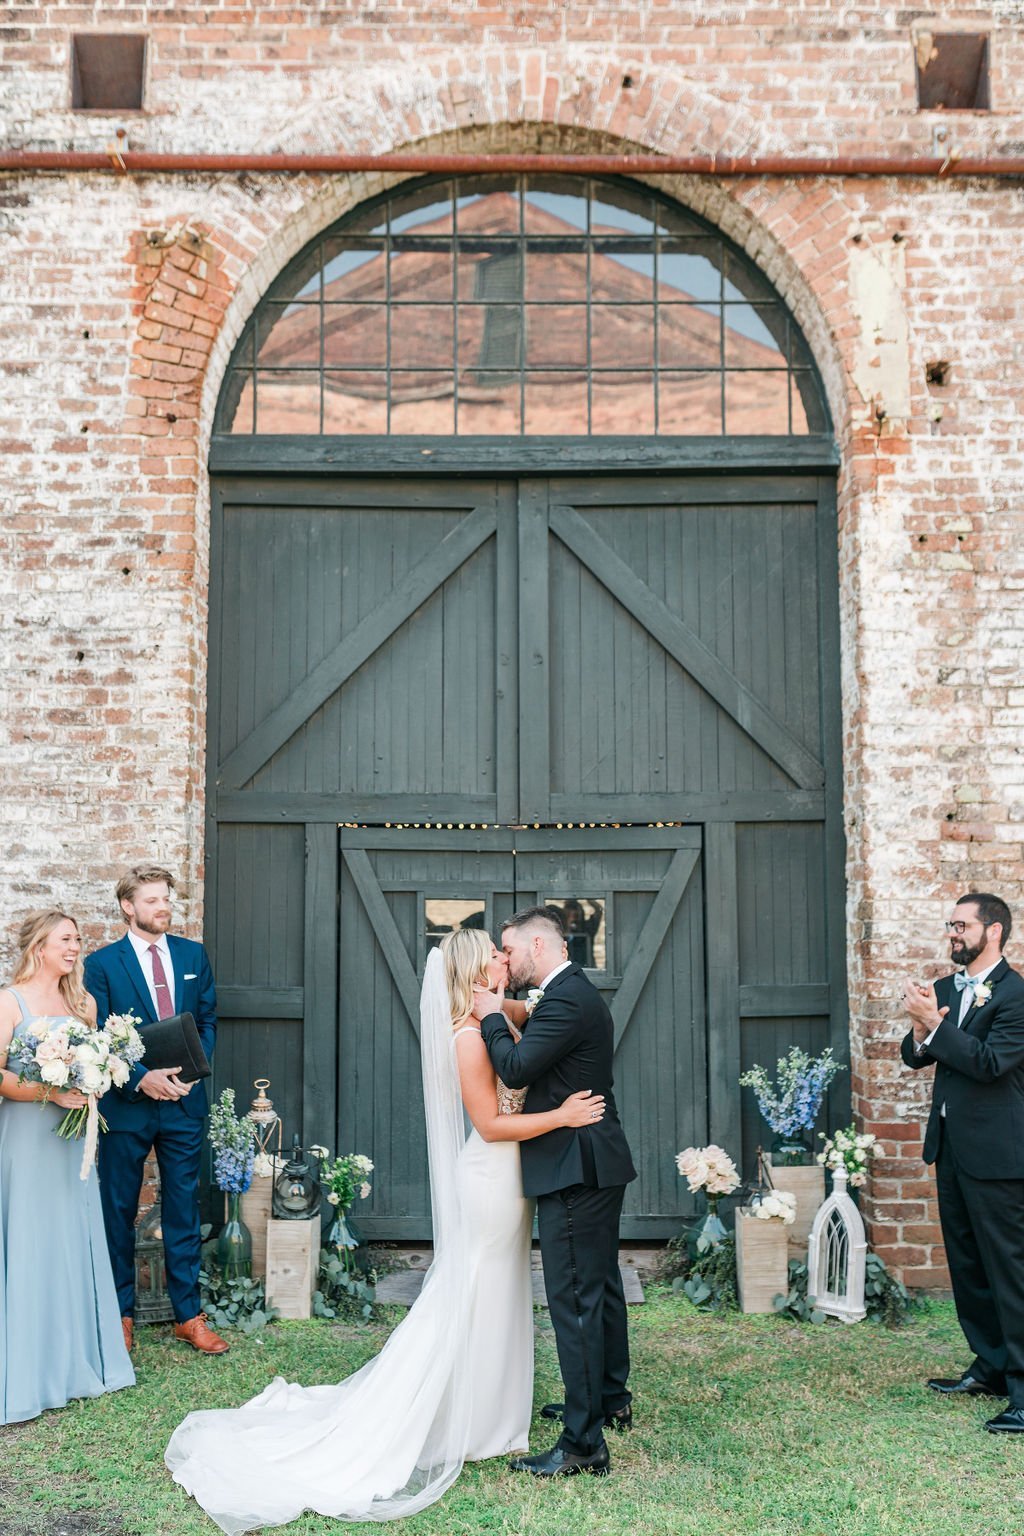 claudia-and-travis-romantic-southern-wedding-at-the-georgia-state-railroad-museum-in-savannah-georgia-planned-by-savannah-wedding-planner-and-savannah-florist-ivory-and-beau-17.jpg